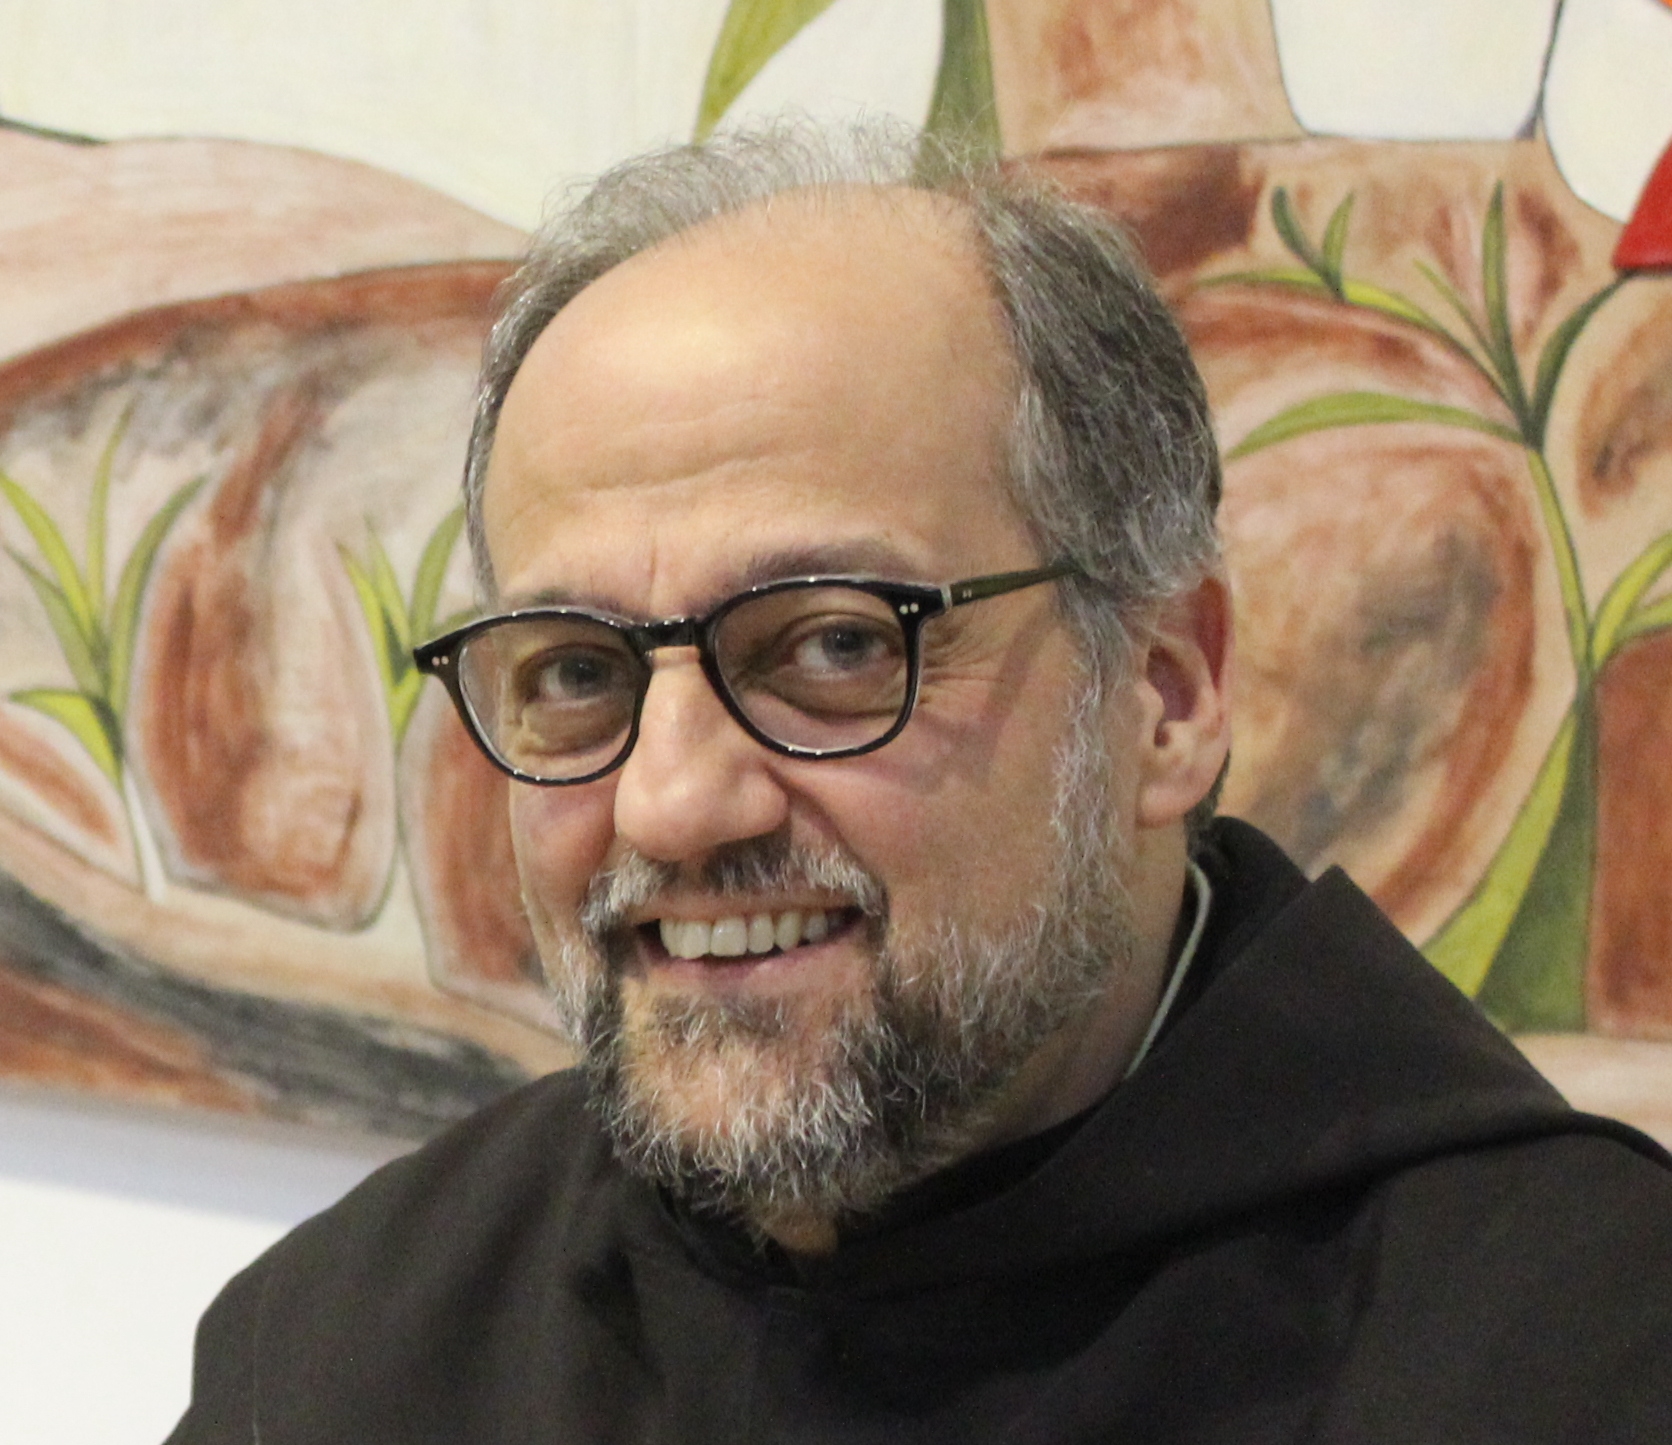 Fr Saverio Cannistra has been re-elected as the Superior General of the Carmelites for the second time